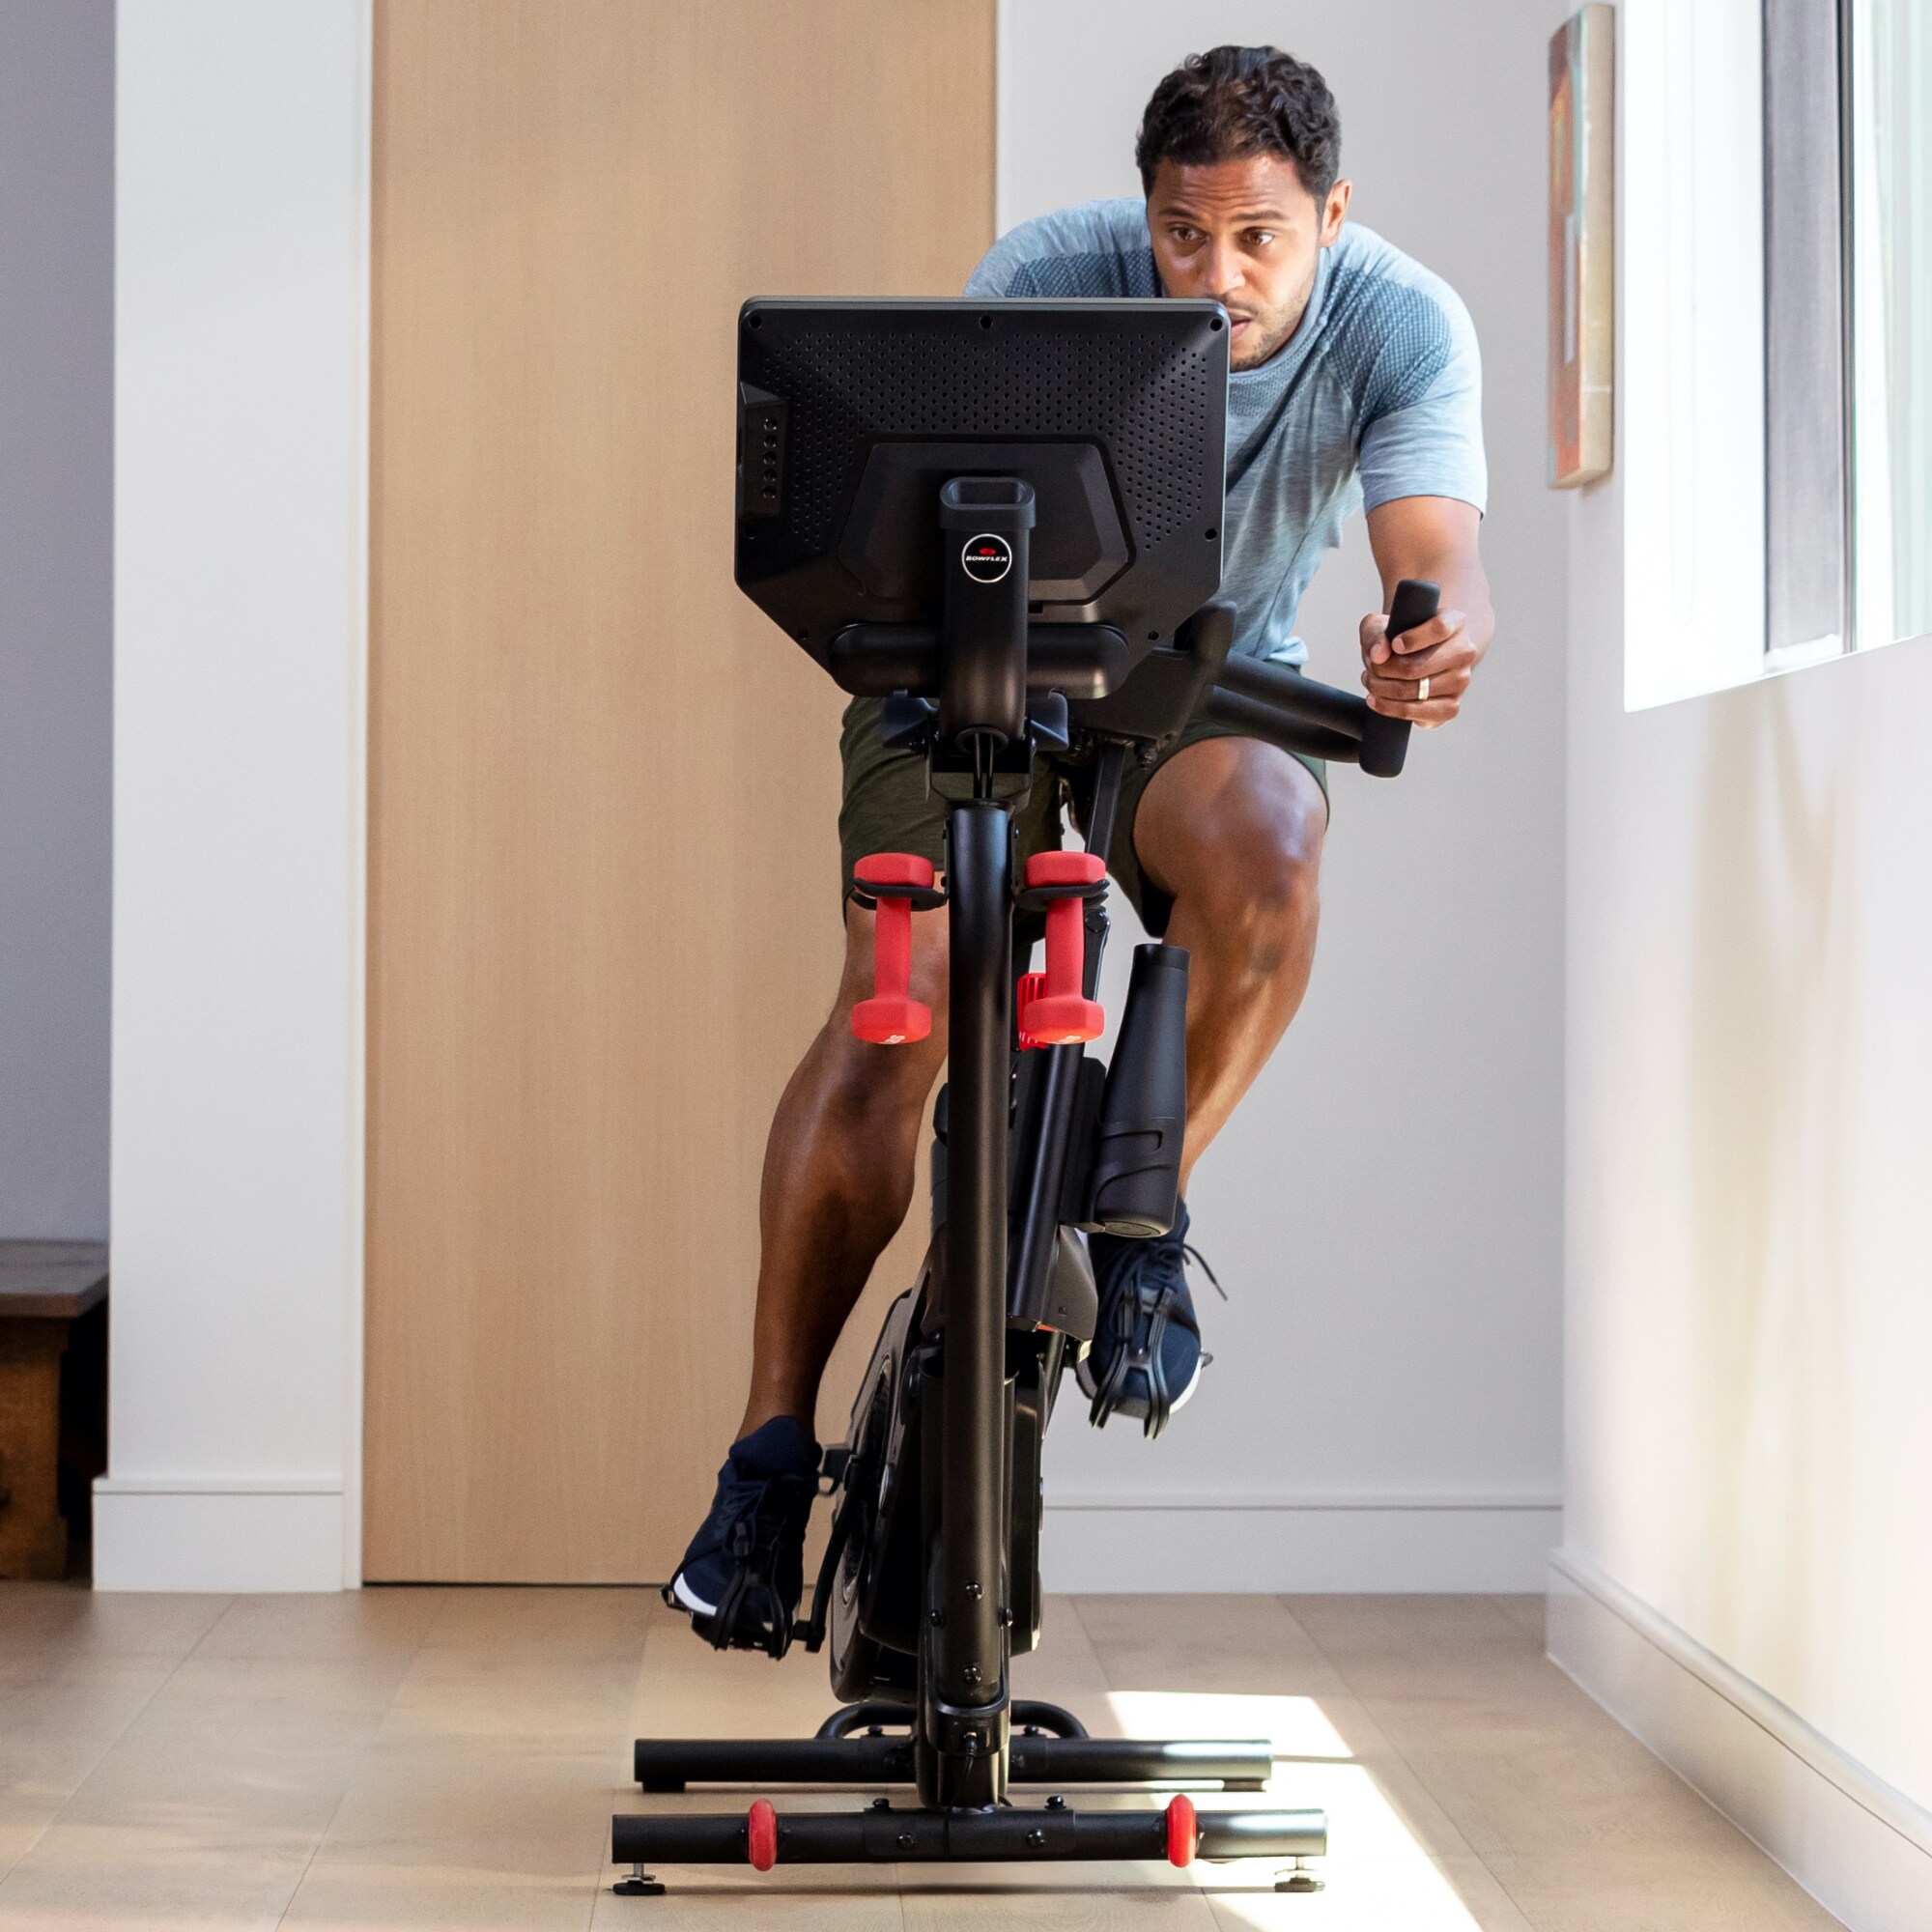 Velocore Bike 16 - The Indoor Exercise Bike That Leans